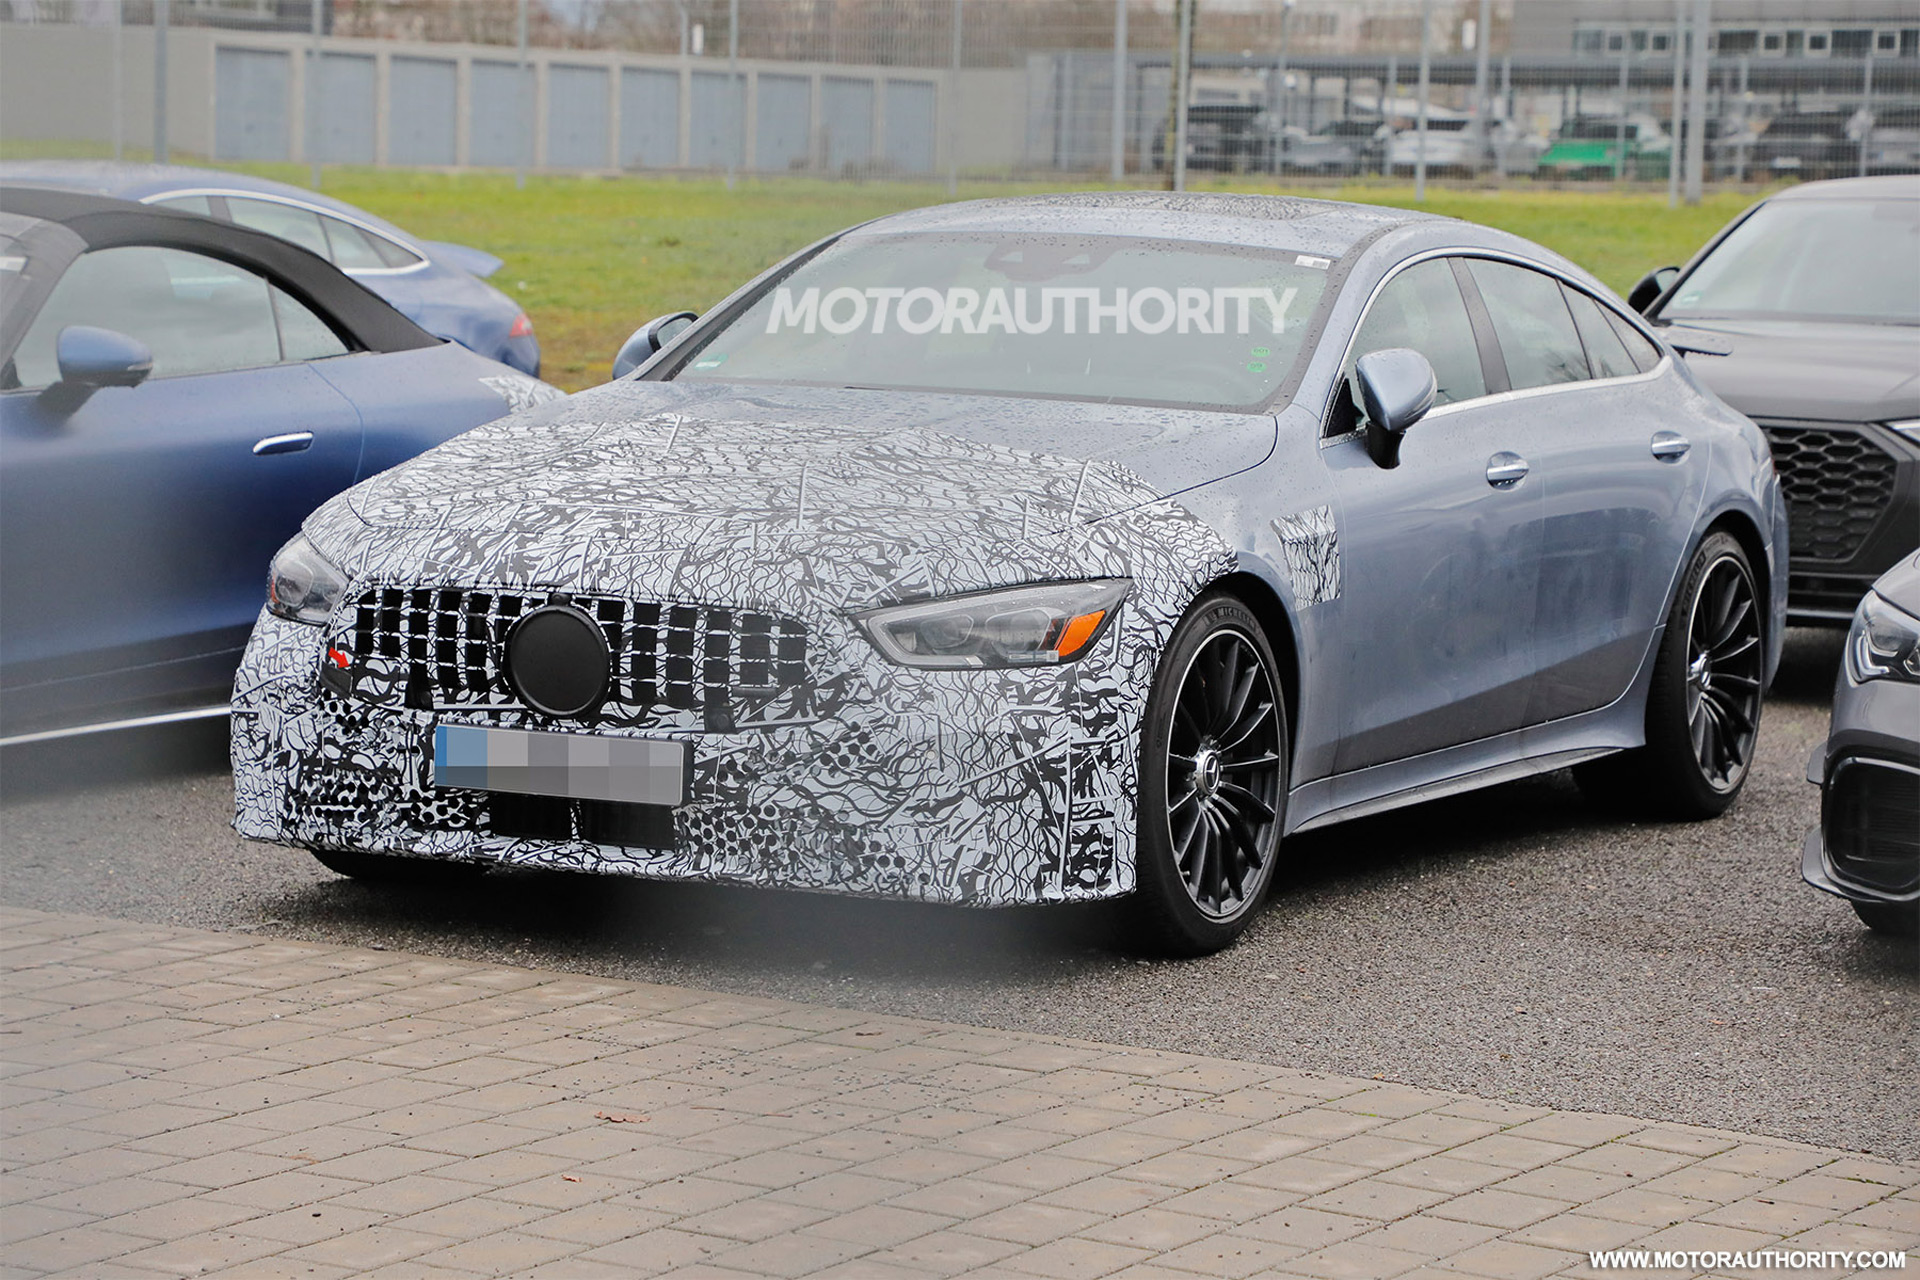 2024 Mercedes-AMG GT Coupe: What We Know So Far